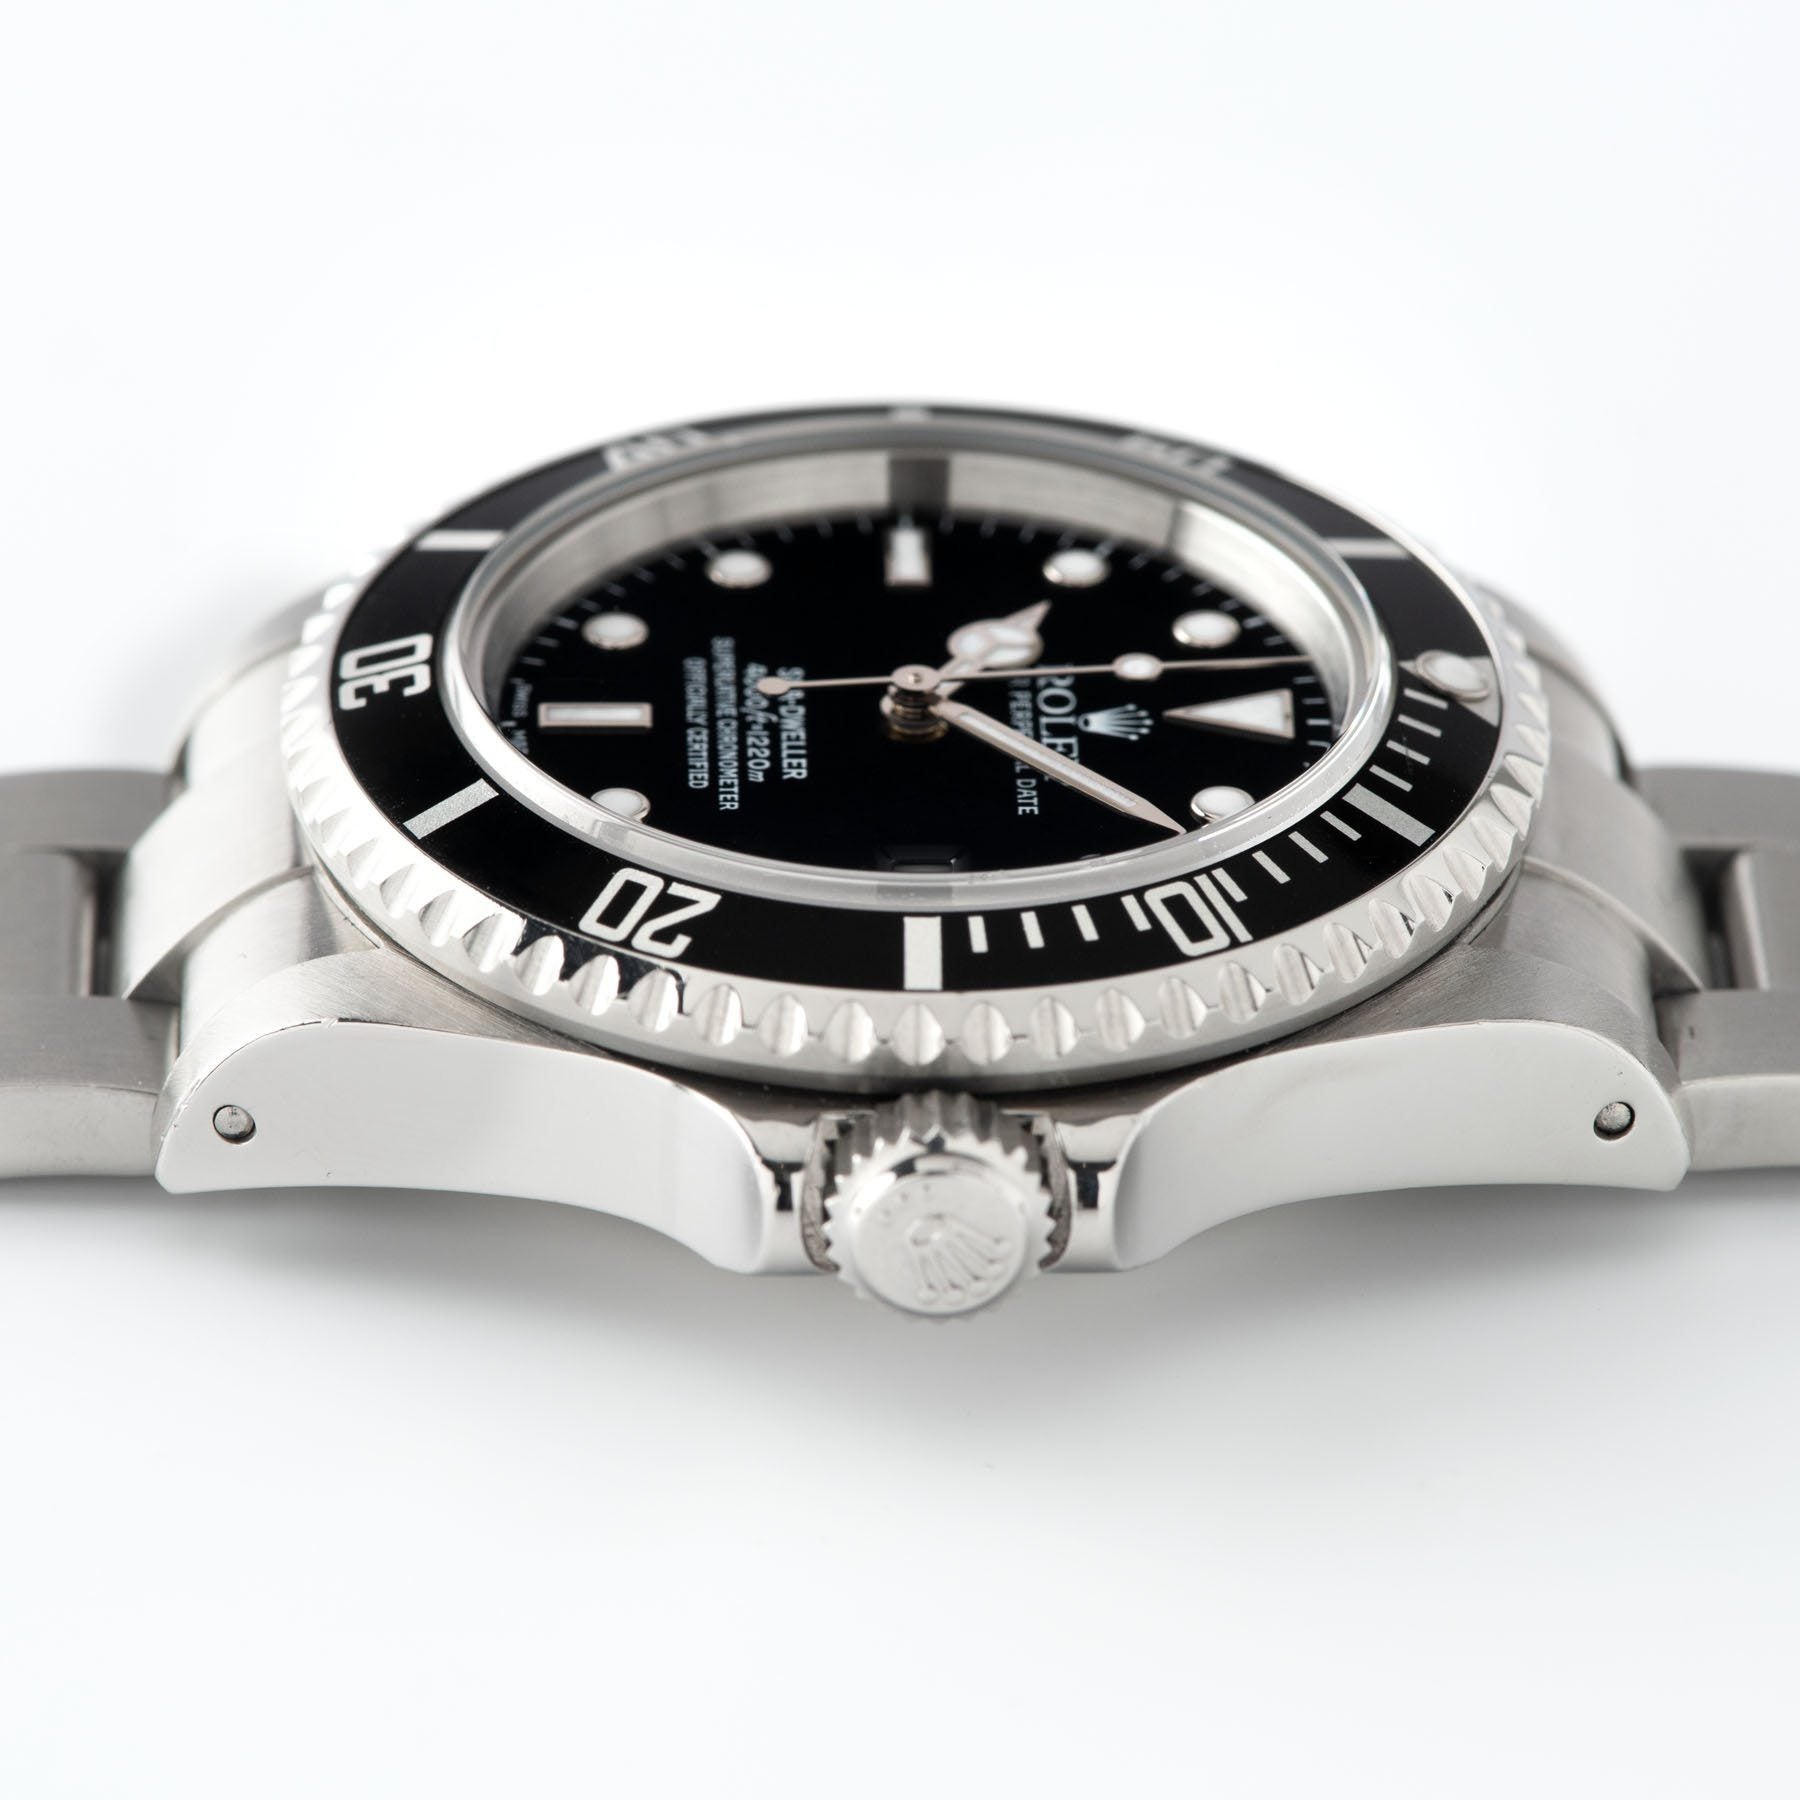 Rolex Seadweller Reference 16600 Box and Papers